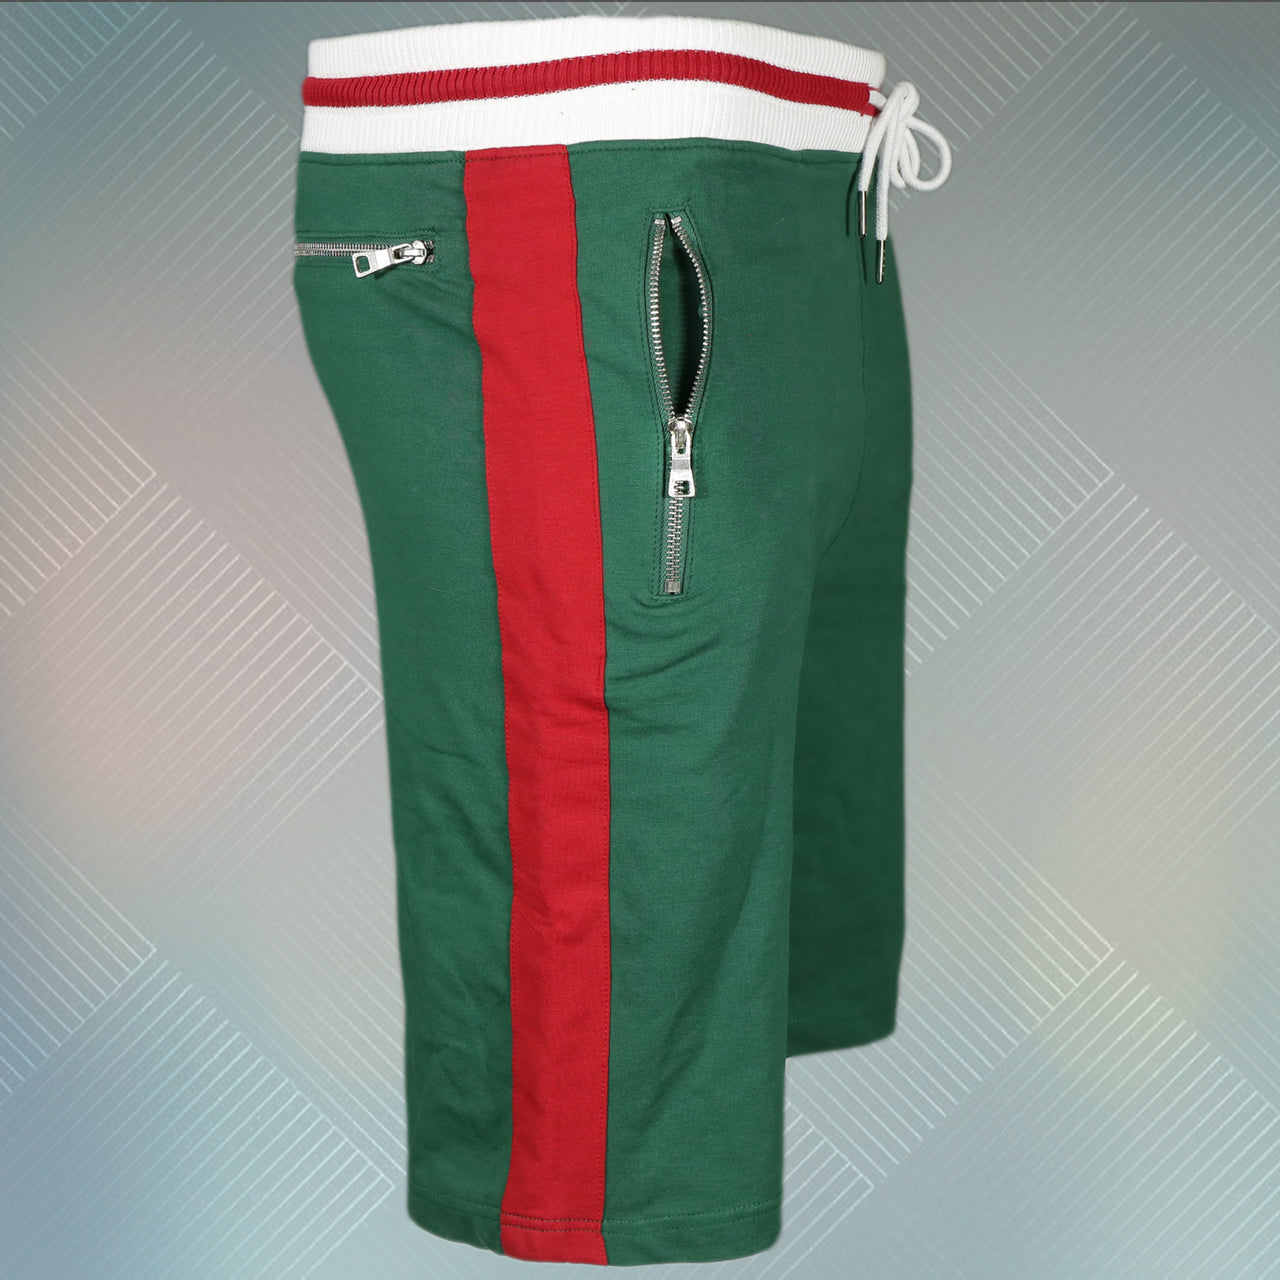 wearers right of the Jordan Craig Green Striped Track Shorts | Retro Inspired Italian Colorway Shorts with Zipper Pockets